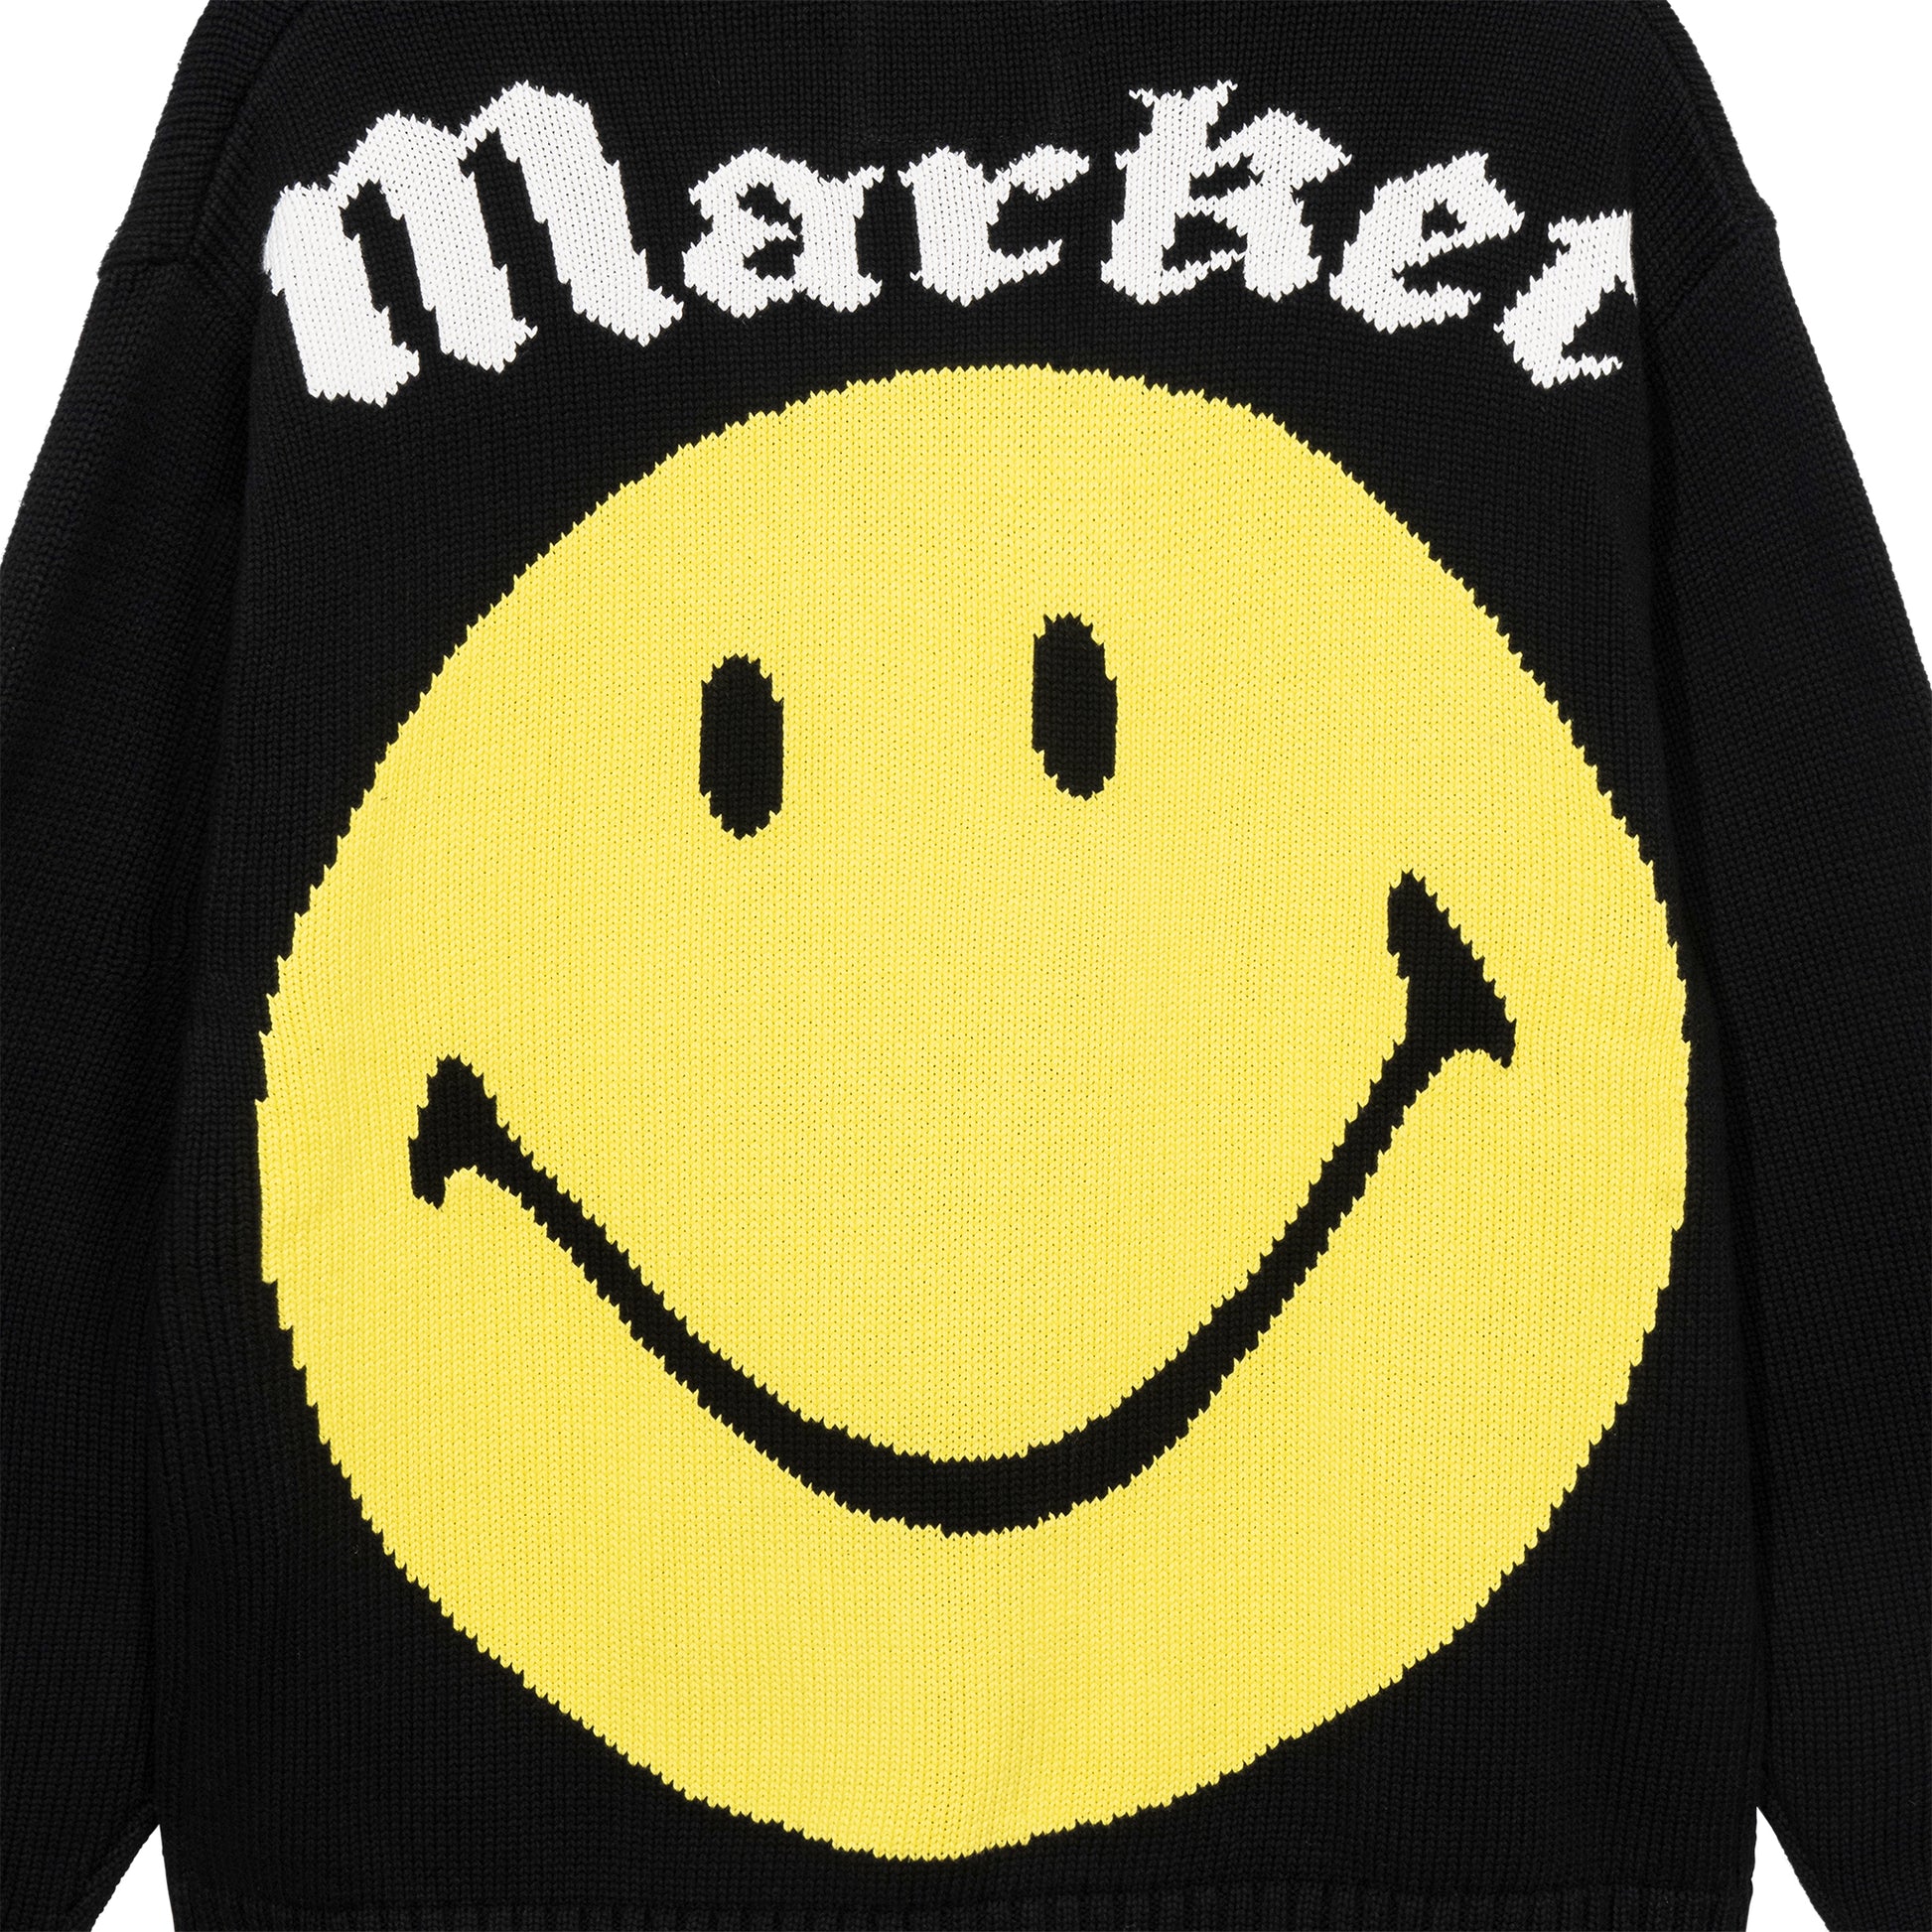 MARKET clothing brand SMILEY GOTHIC SWEATER. Find more graphic tees, jackets, cardigans and more at MarketStudios.com. Formally Chinatown Market.